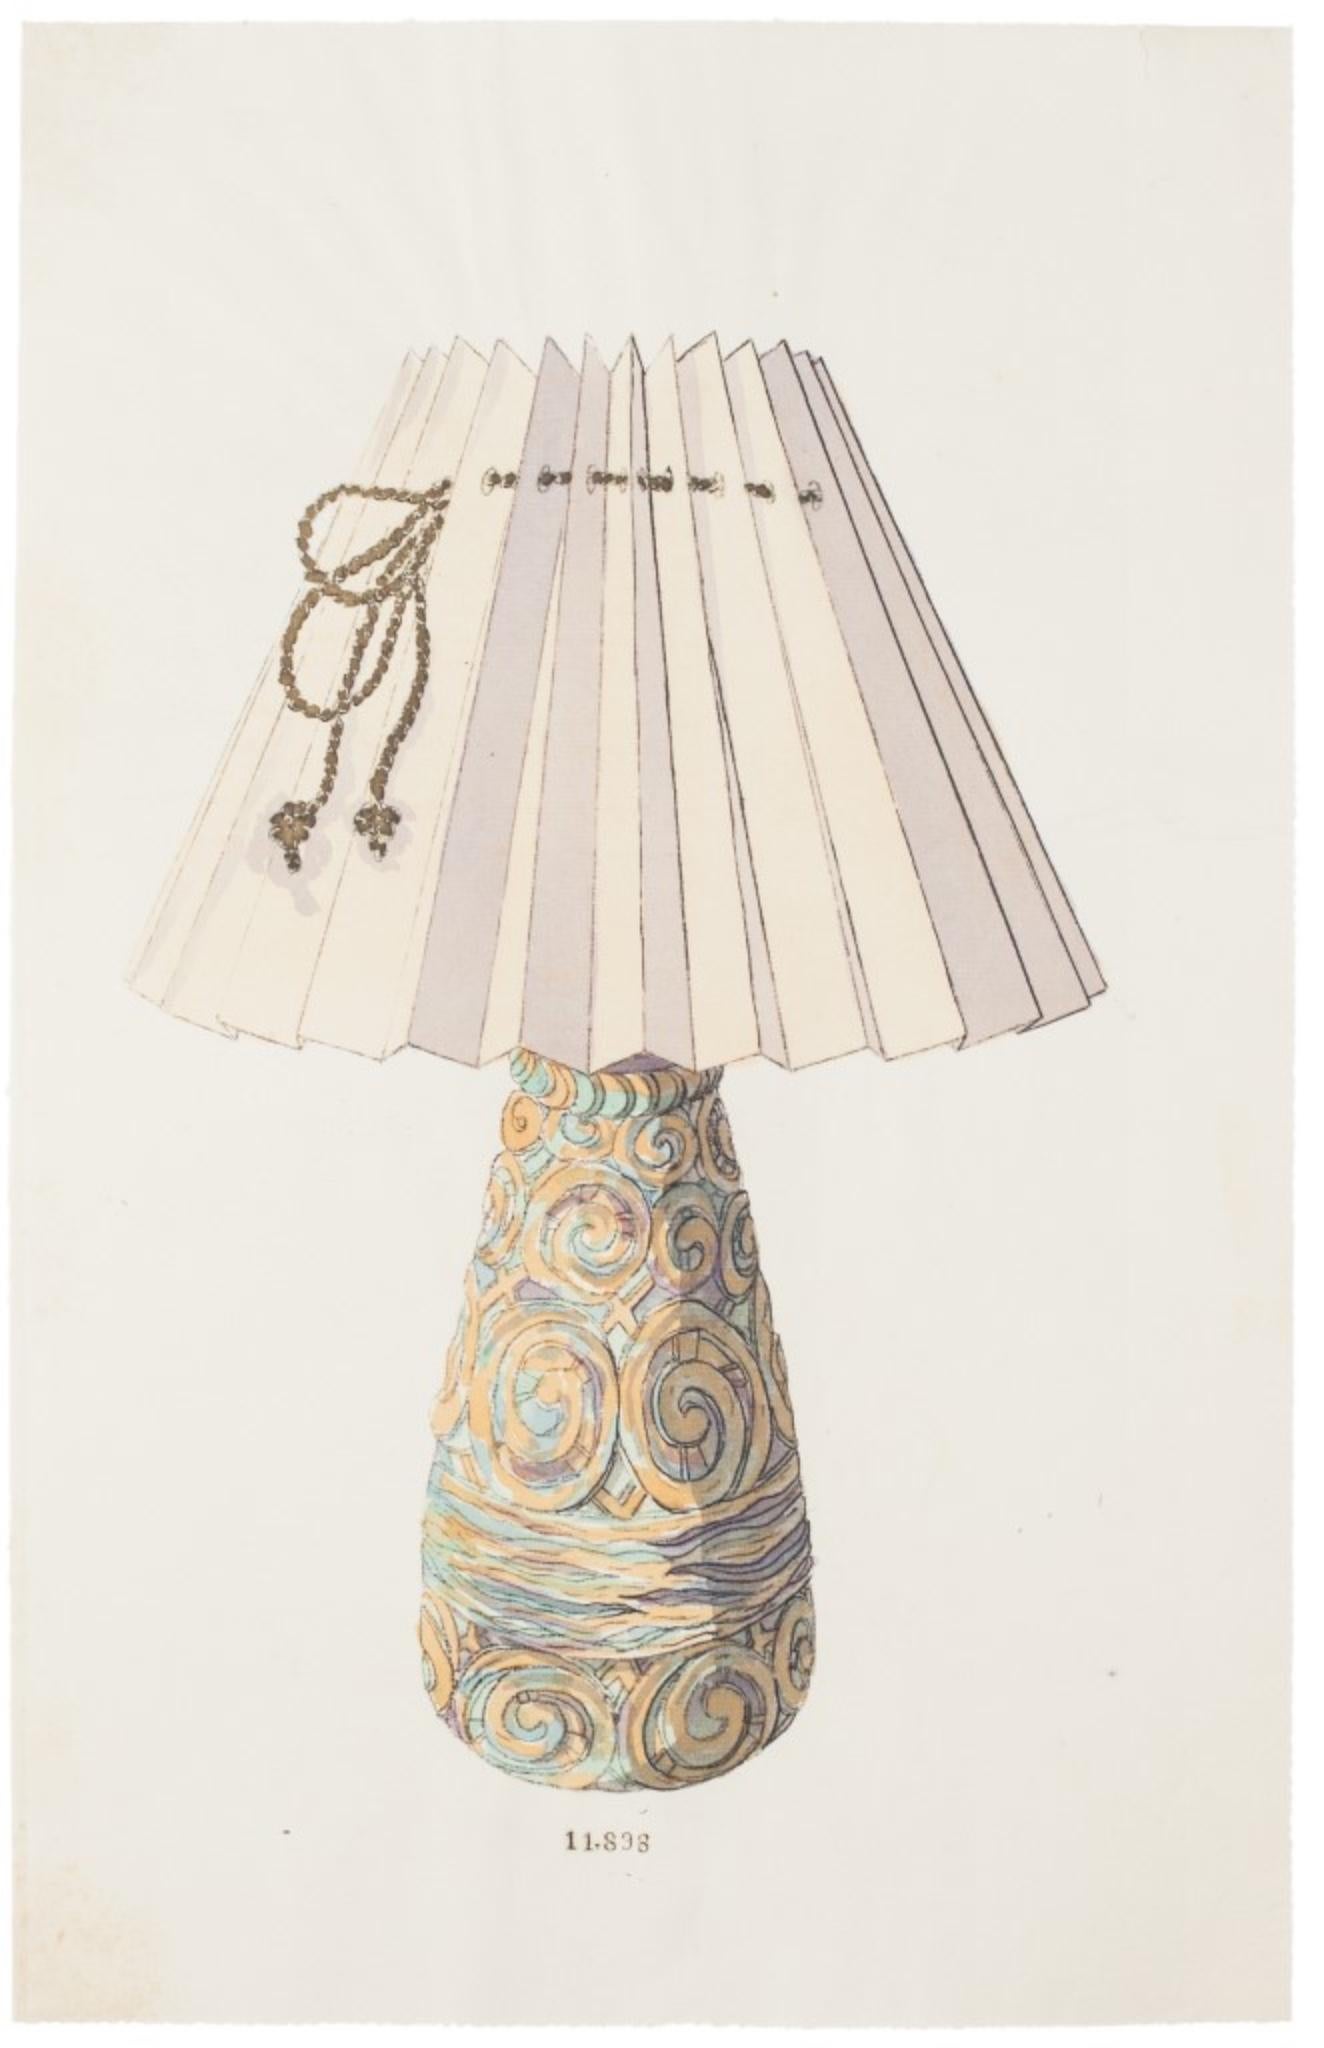 Unknown Figurative Art - Lamp - Original China Ink and Watercolor - Late 19th Century